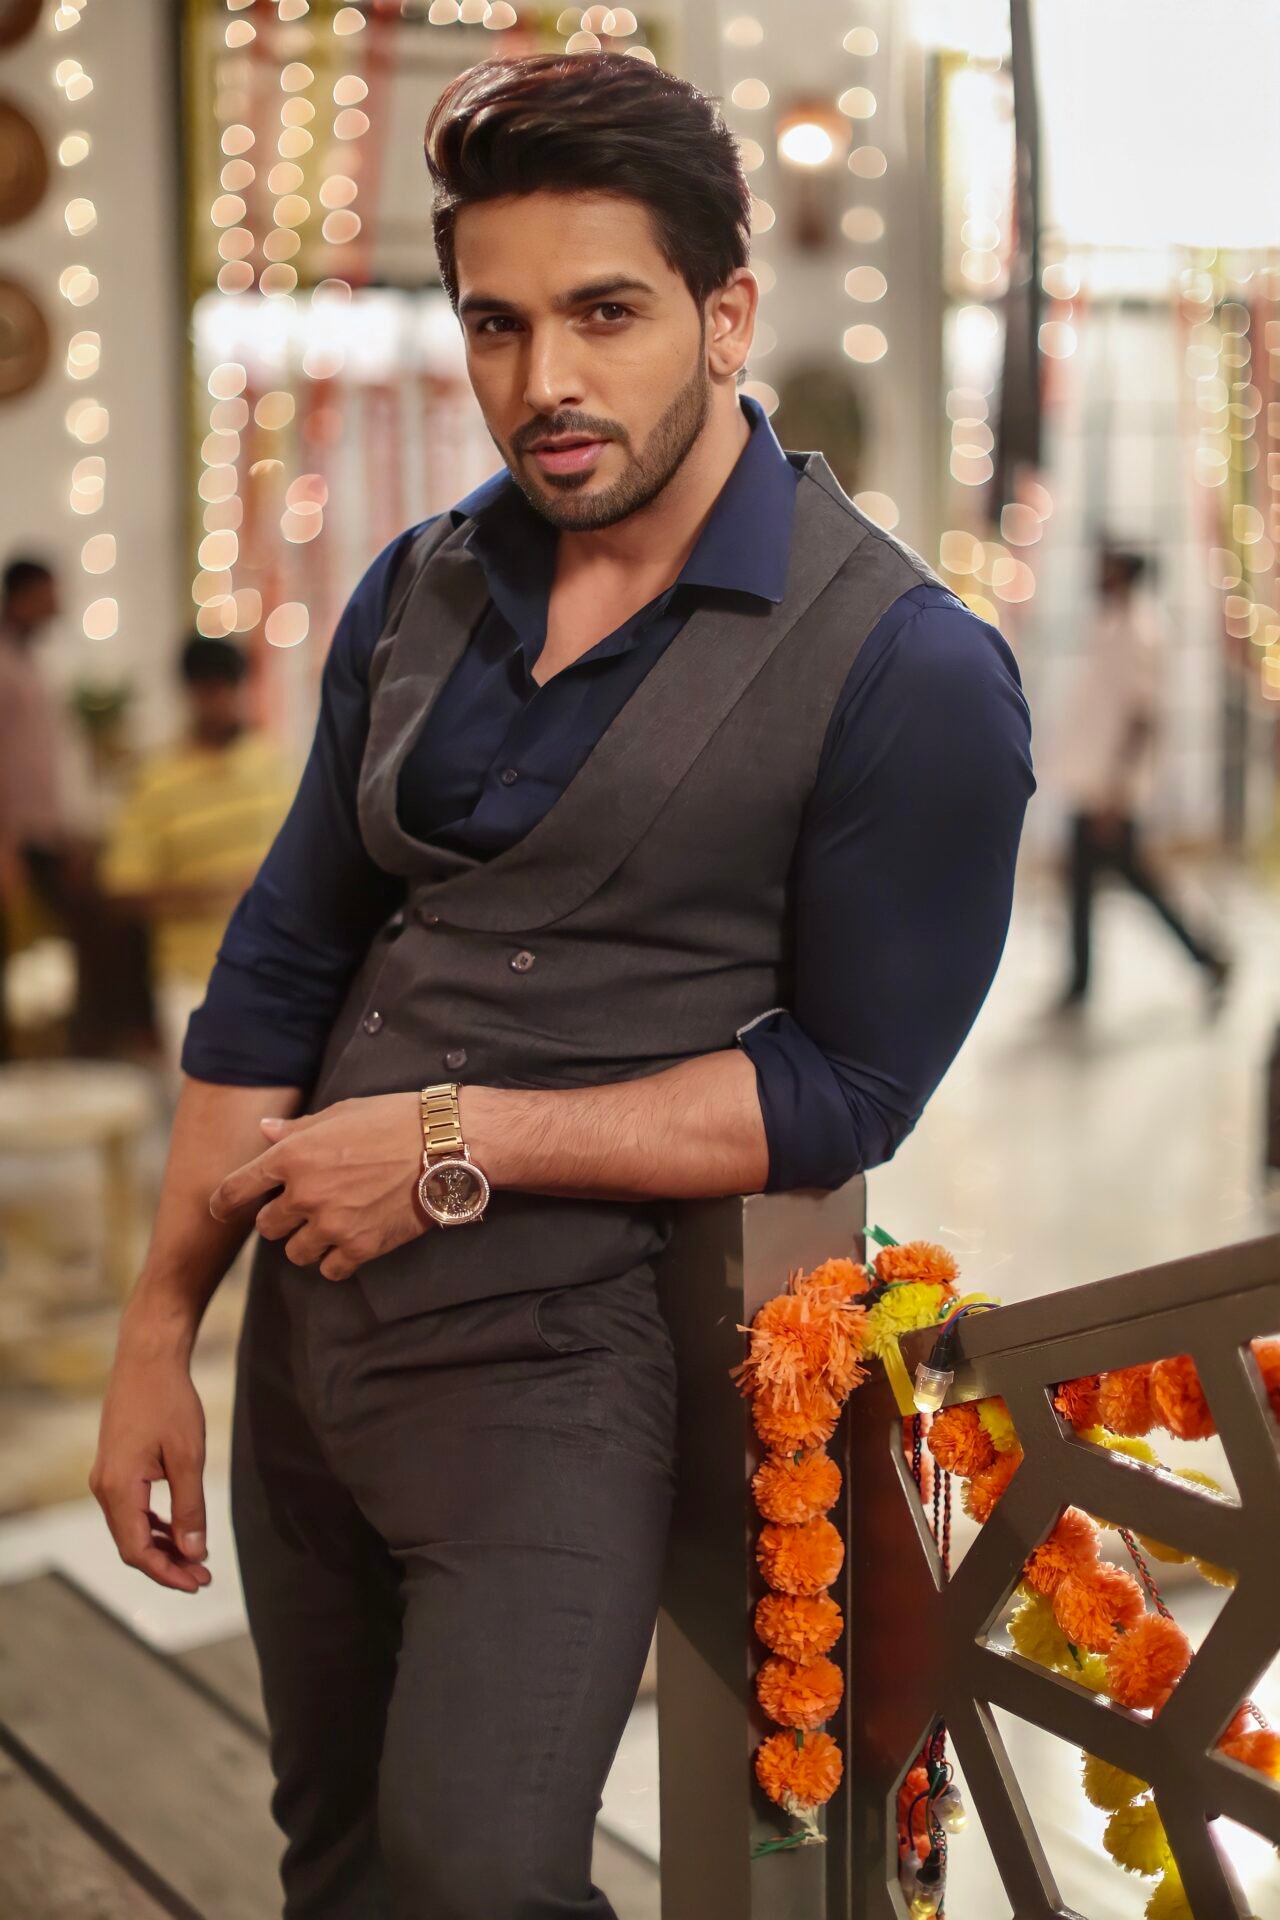 You are currently viewing Shubh Shagun actor Shehzada Dhami: It is tough being an actor in a daily soap because you don’t get time for your personal life